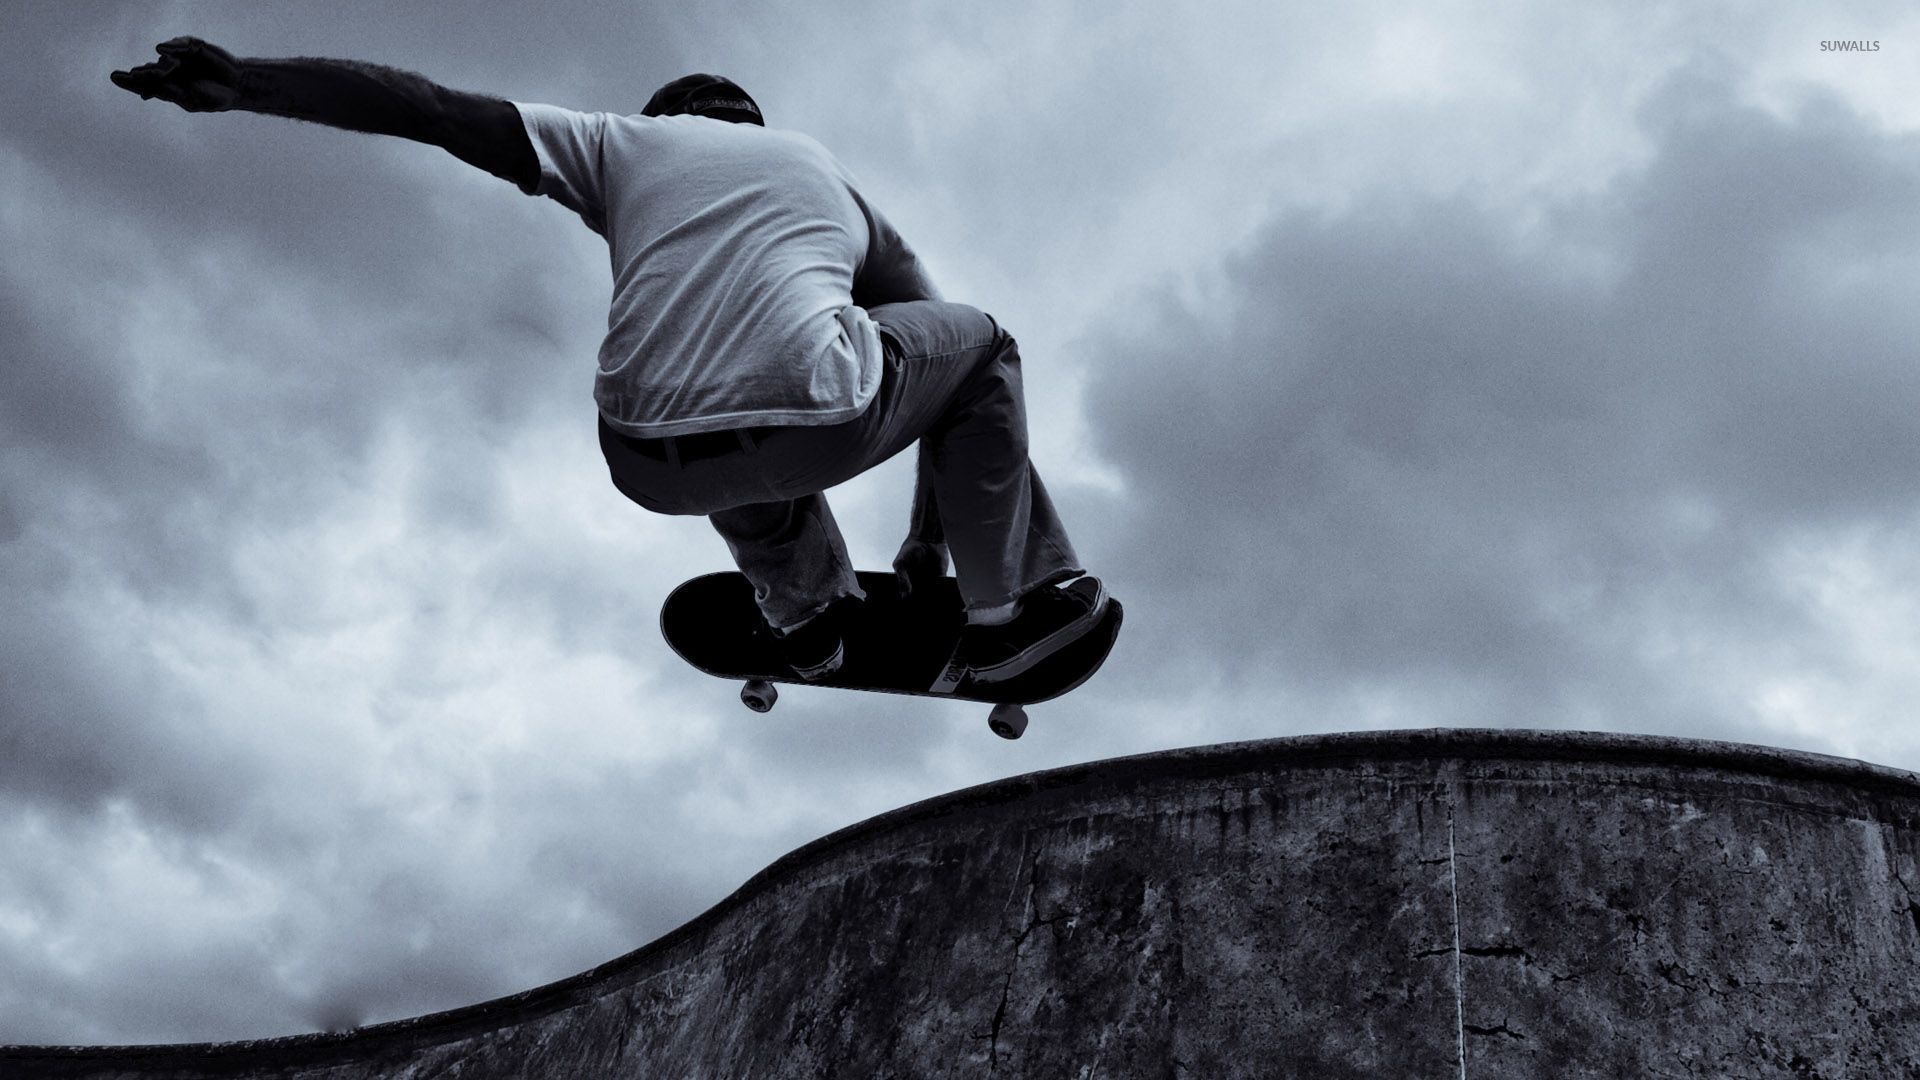 Skater wallpaper - Photography wallpapers - #29699